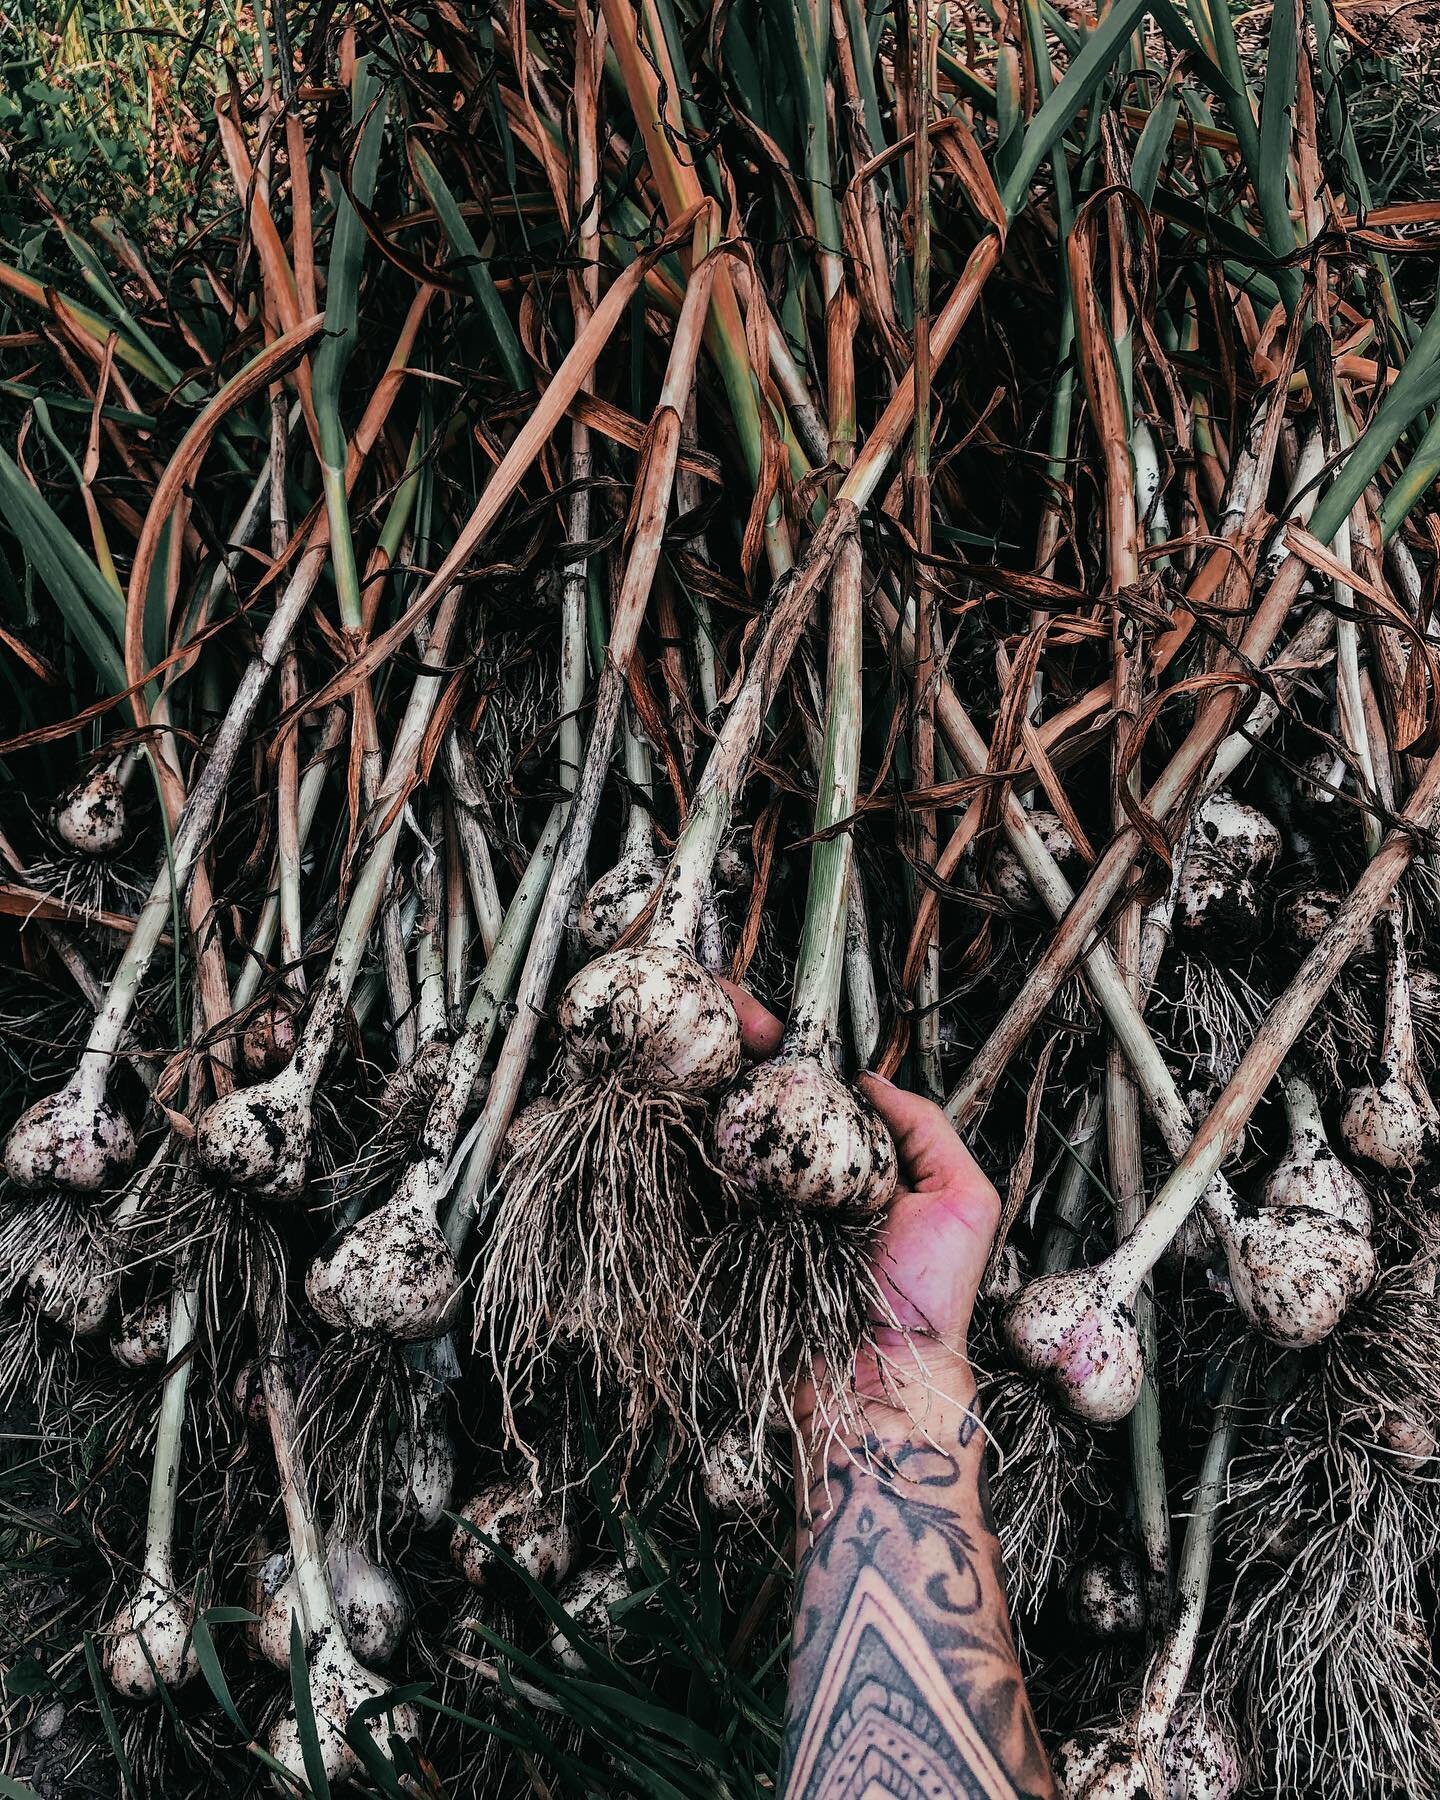 Harvesting bulb &amp; seed 🧄  the start of the changing of seasons 🍂 

Harvested over 200 bulbs of garlic today. Super happy with this years harvest due to even bigger bulbs &amp; cloves than last year.

I am growing a variety called &ldquo;big boy